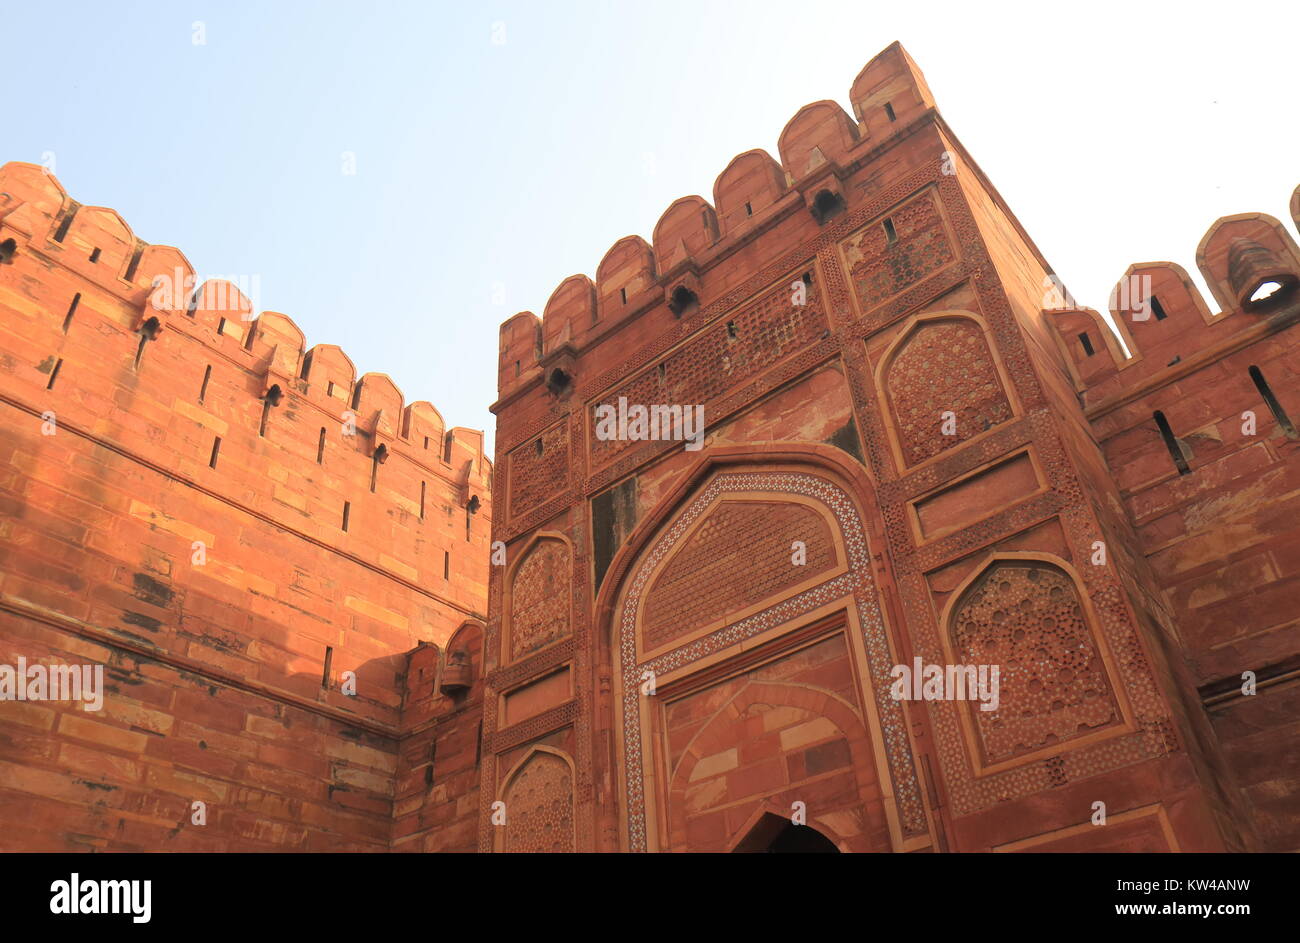 Amar Singh gate Agra fort historical architecture Agra India Stock Photo